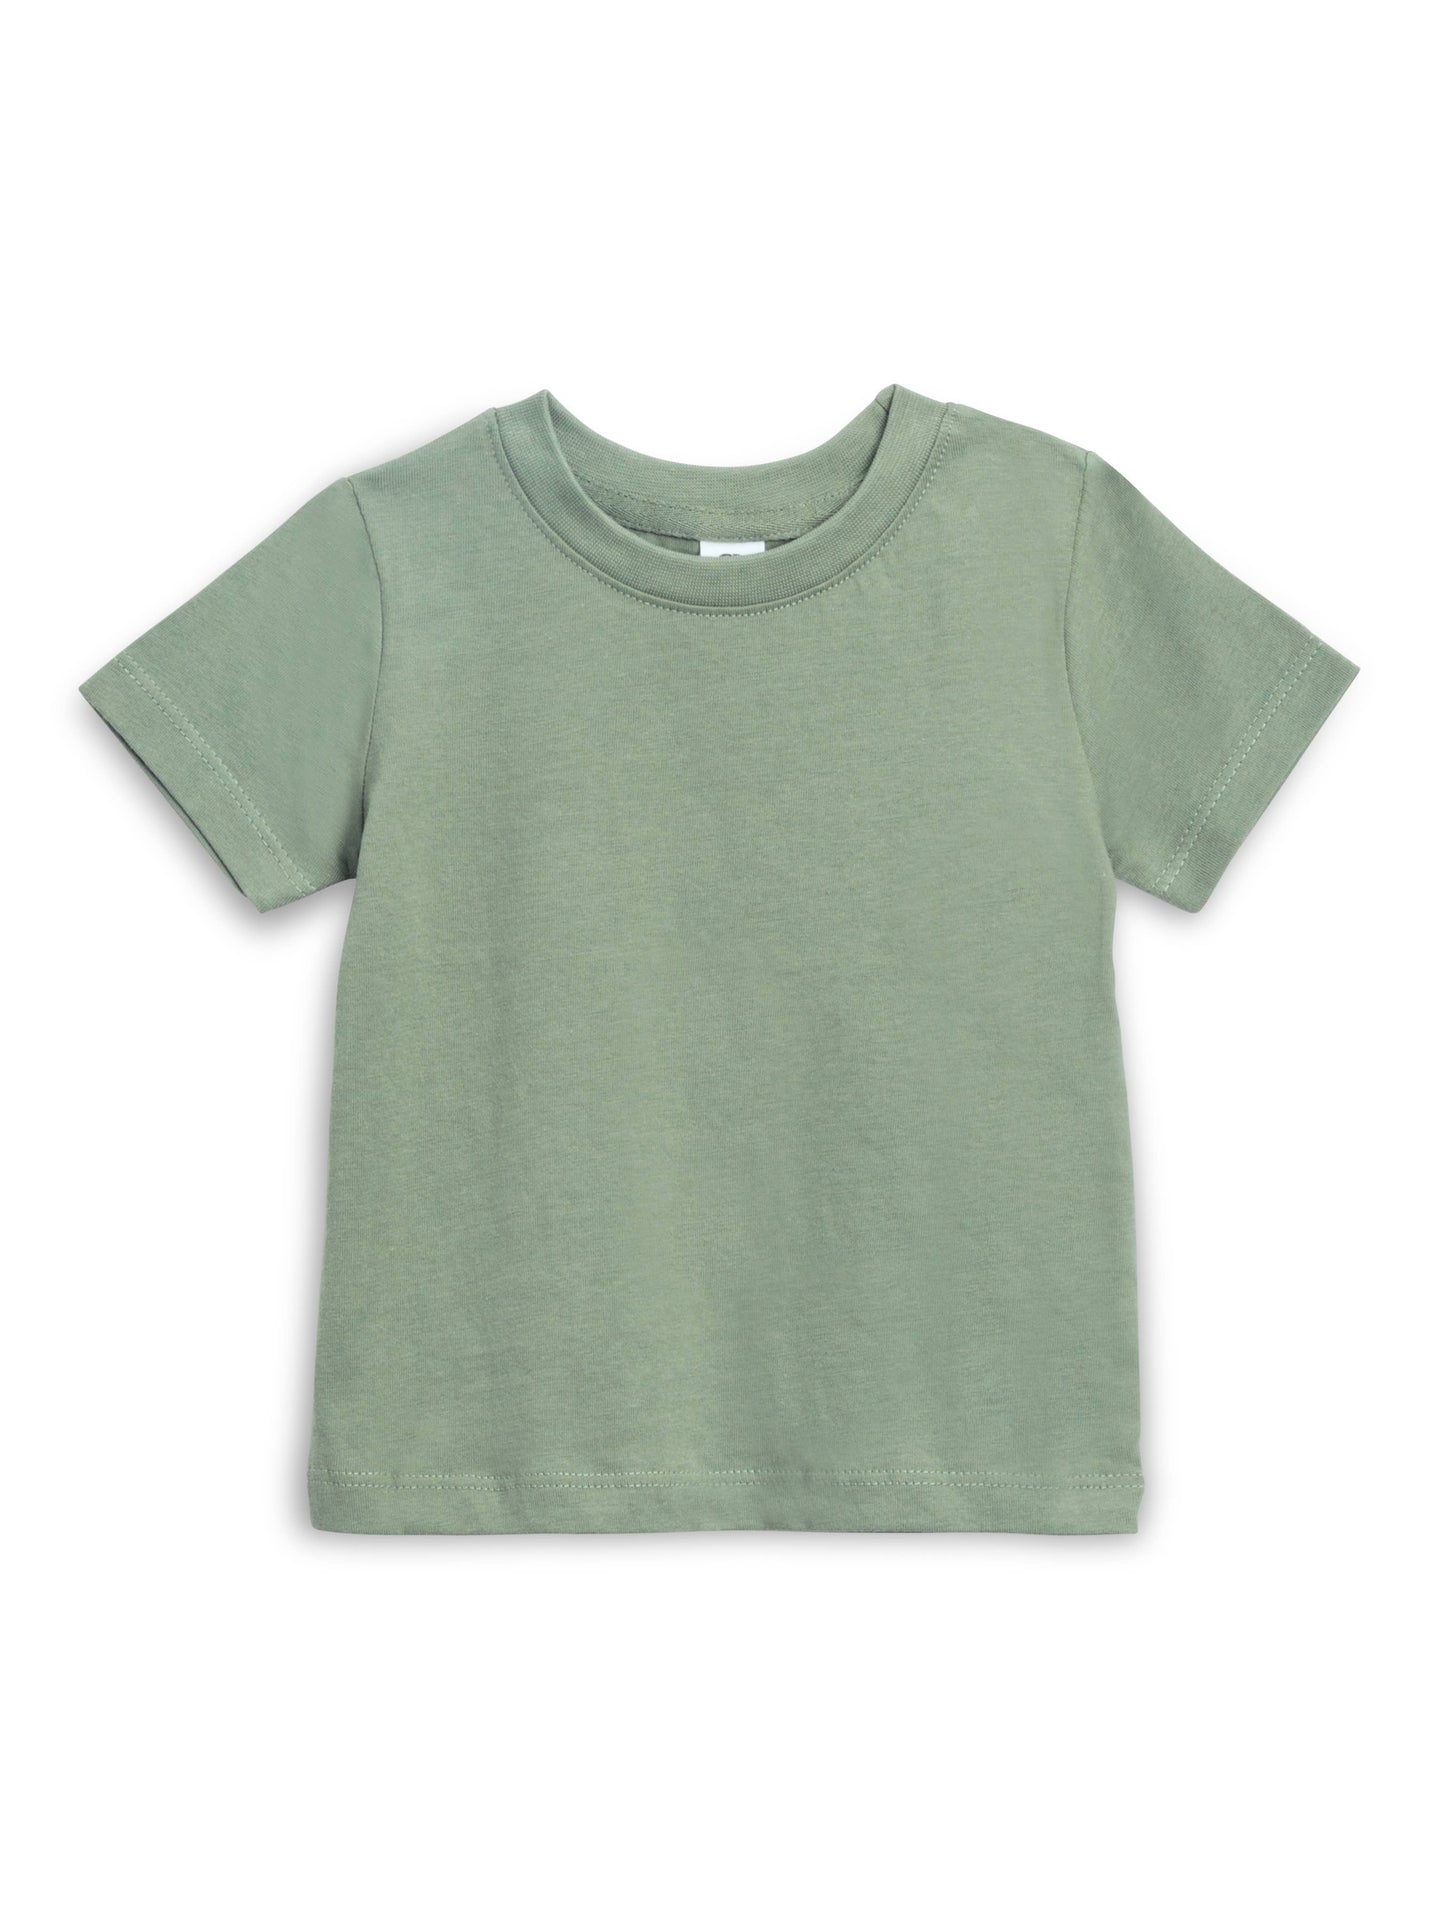 Colored Organics - Organic Baby and Kids Classic Crew Neck Tee - Thyme